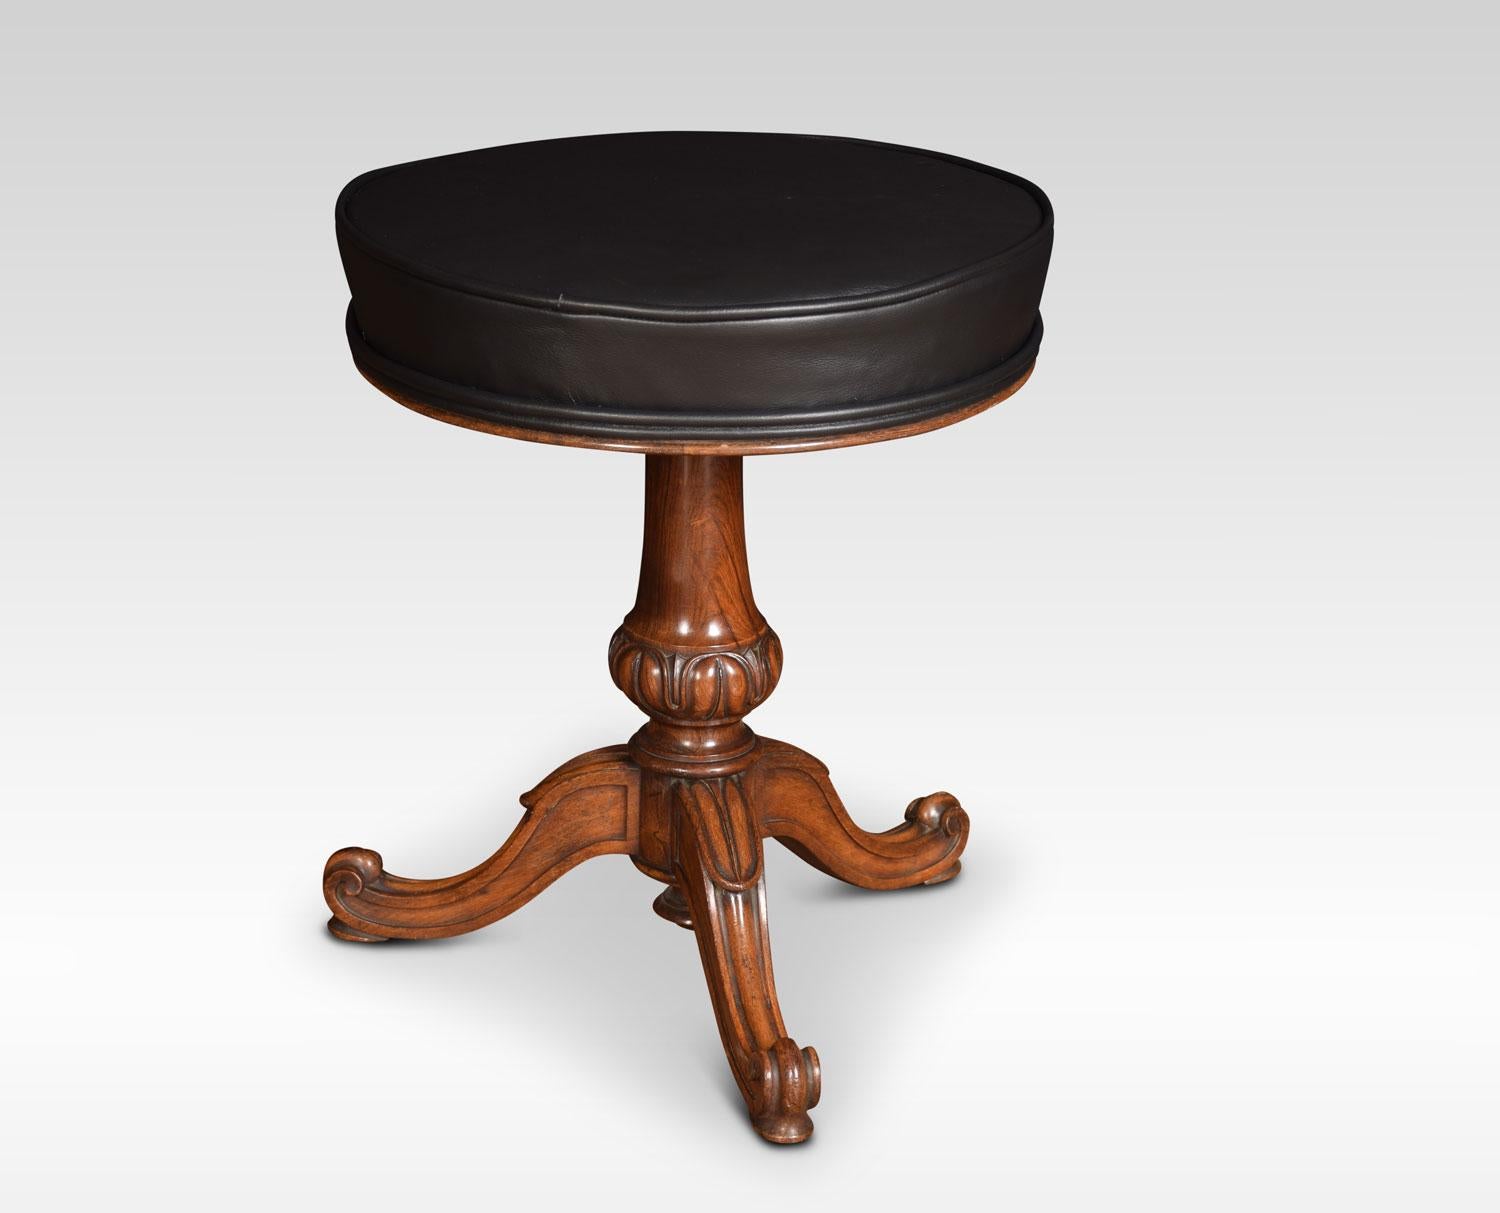 Victorian rosewood adjustable piano stool with upholstered black leather seat. Above turned central column all raised up on scroll cabriole legs.
Dimensions:
Height 19 inches adjustable to 23.5 inches
Width 17 inches
Depth 17 inches.